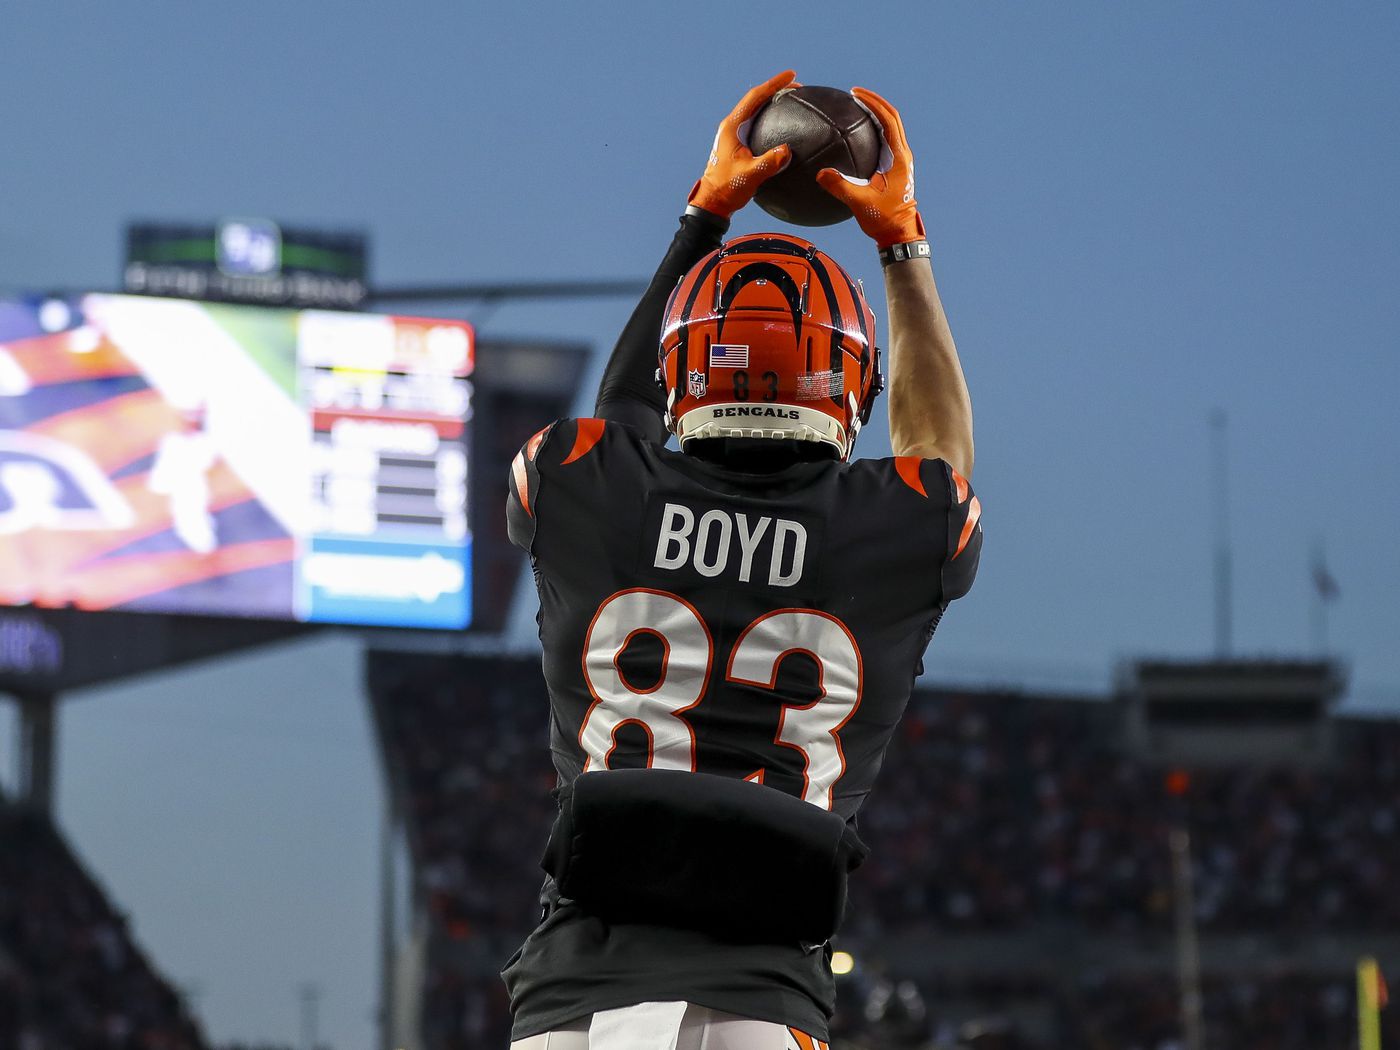   Tyler Boyds NFL Free Agency Saga: A Strategic Play for His Next Move